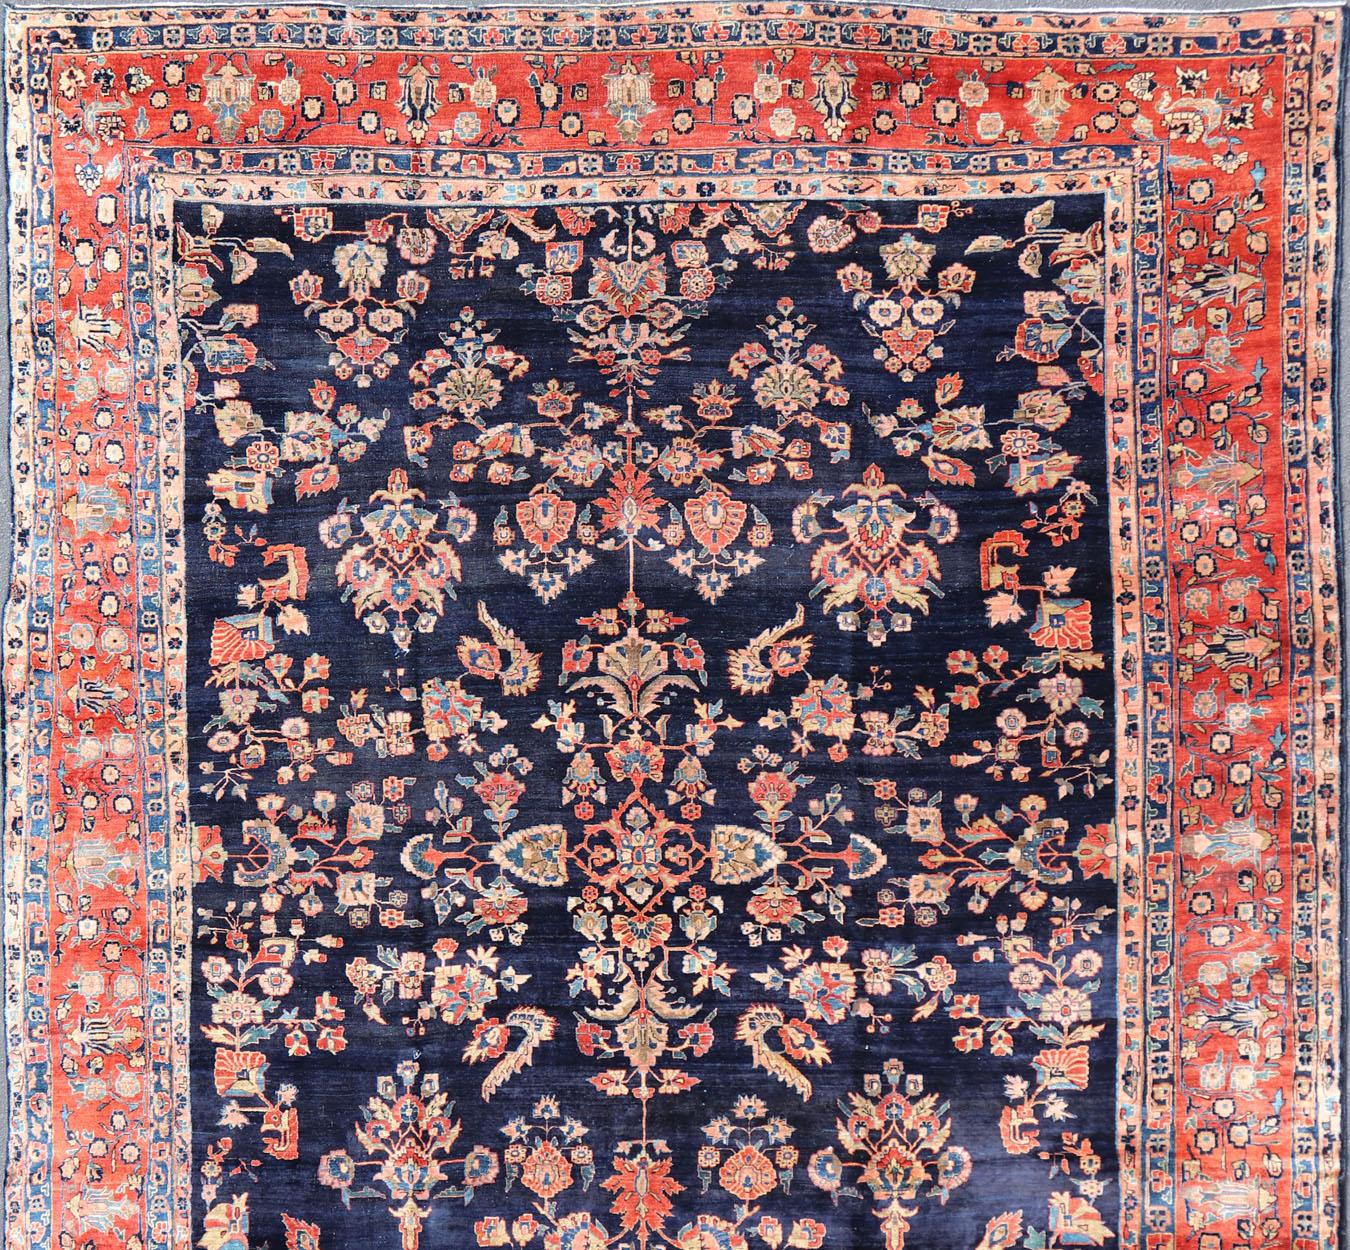 Sarouk Farahan Antique Large Sarouk Faraghan Rug with Floral Pattern in Navy and Orange-Red For Sale